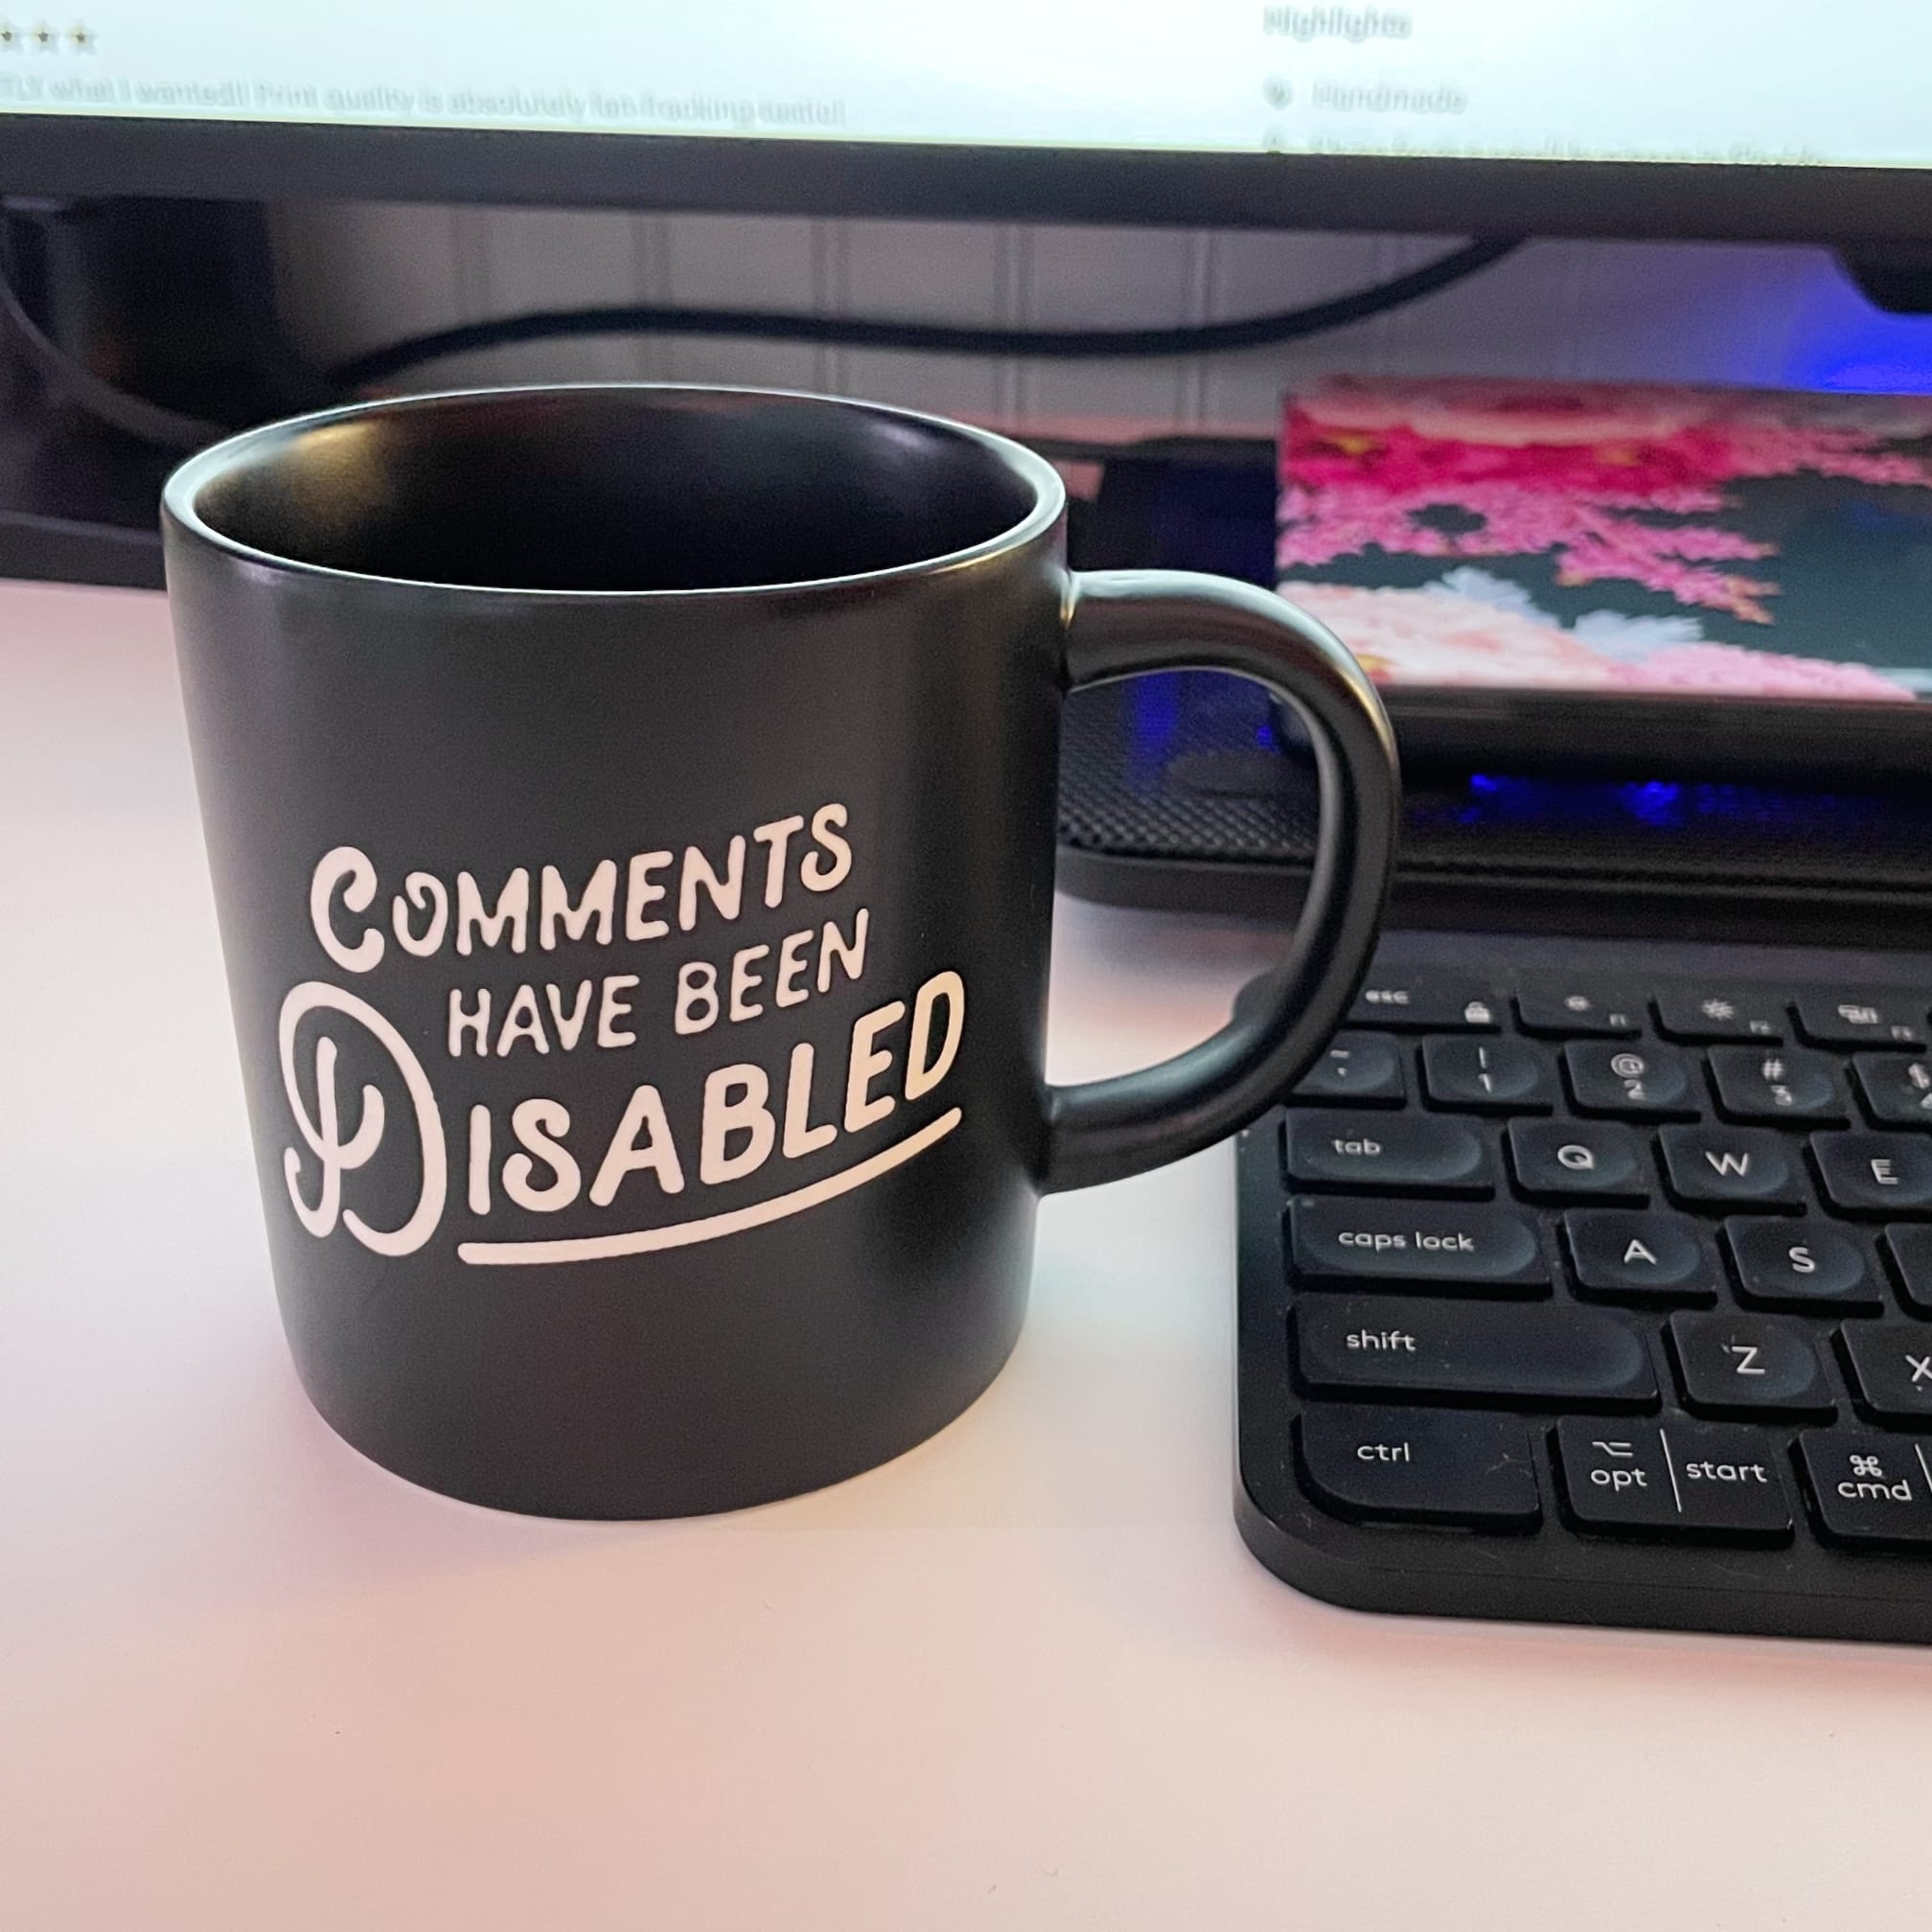 A mug with the text, "Comments Have Been Disabled" on it, next to a keyboard and a laptop on a cooling mat behind it